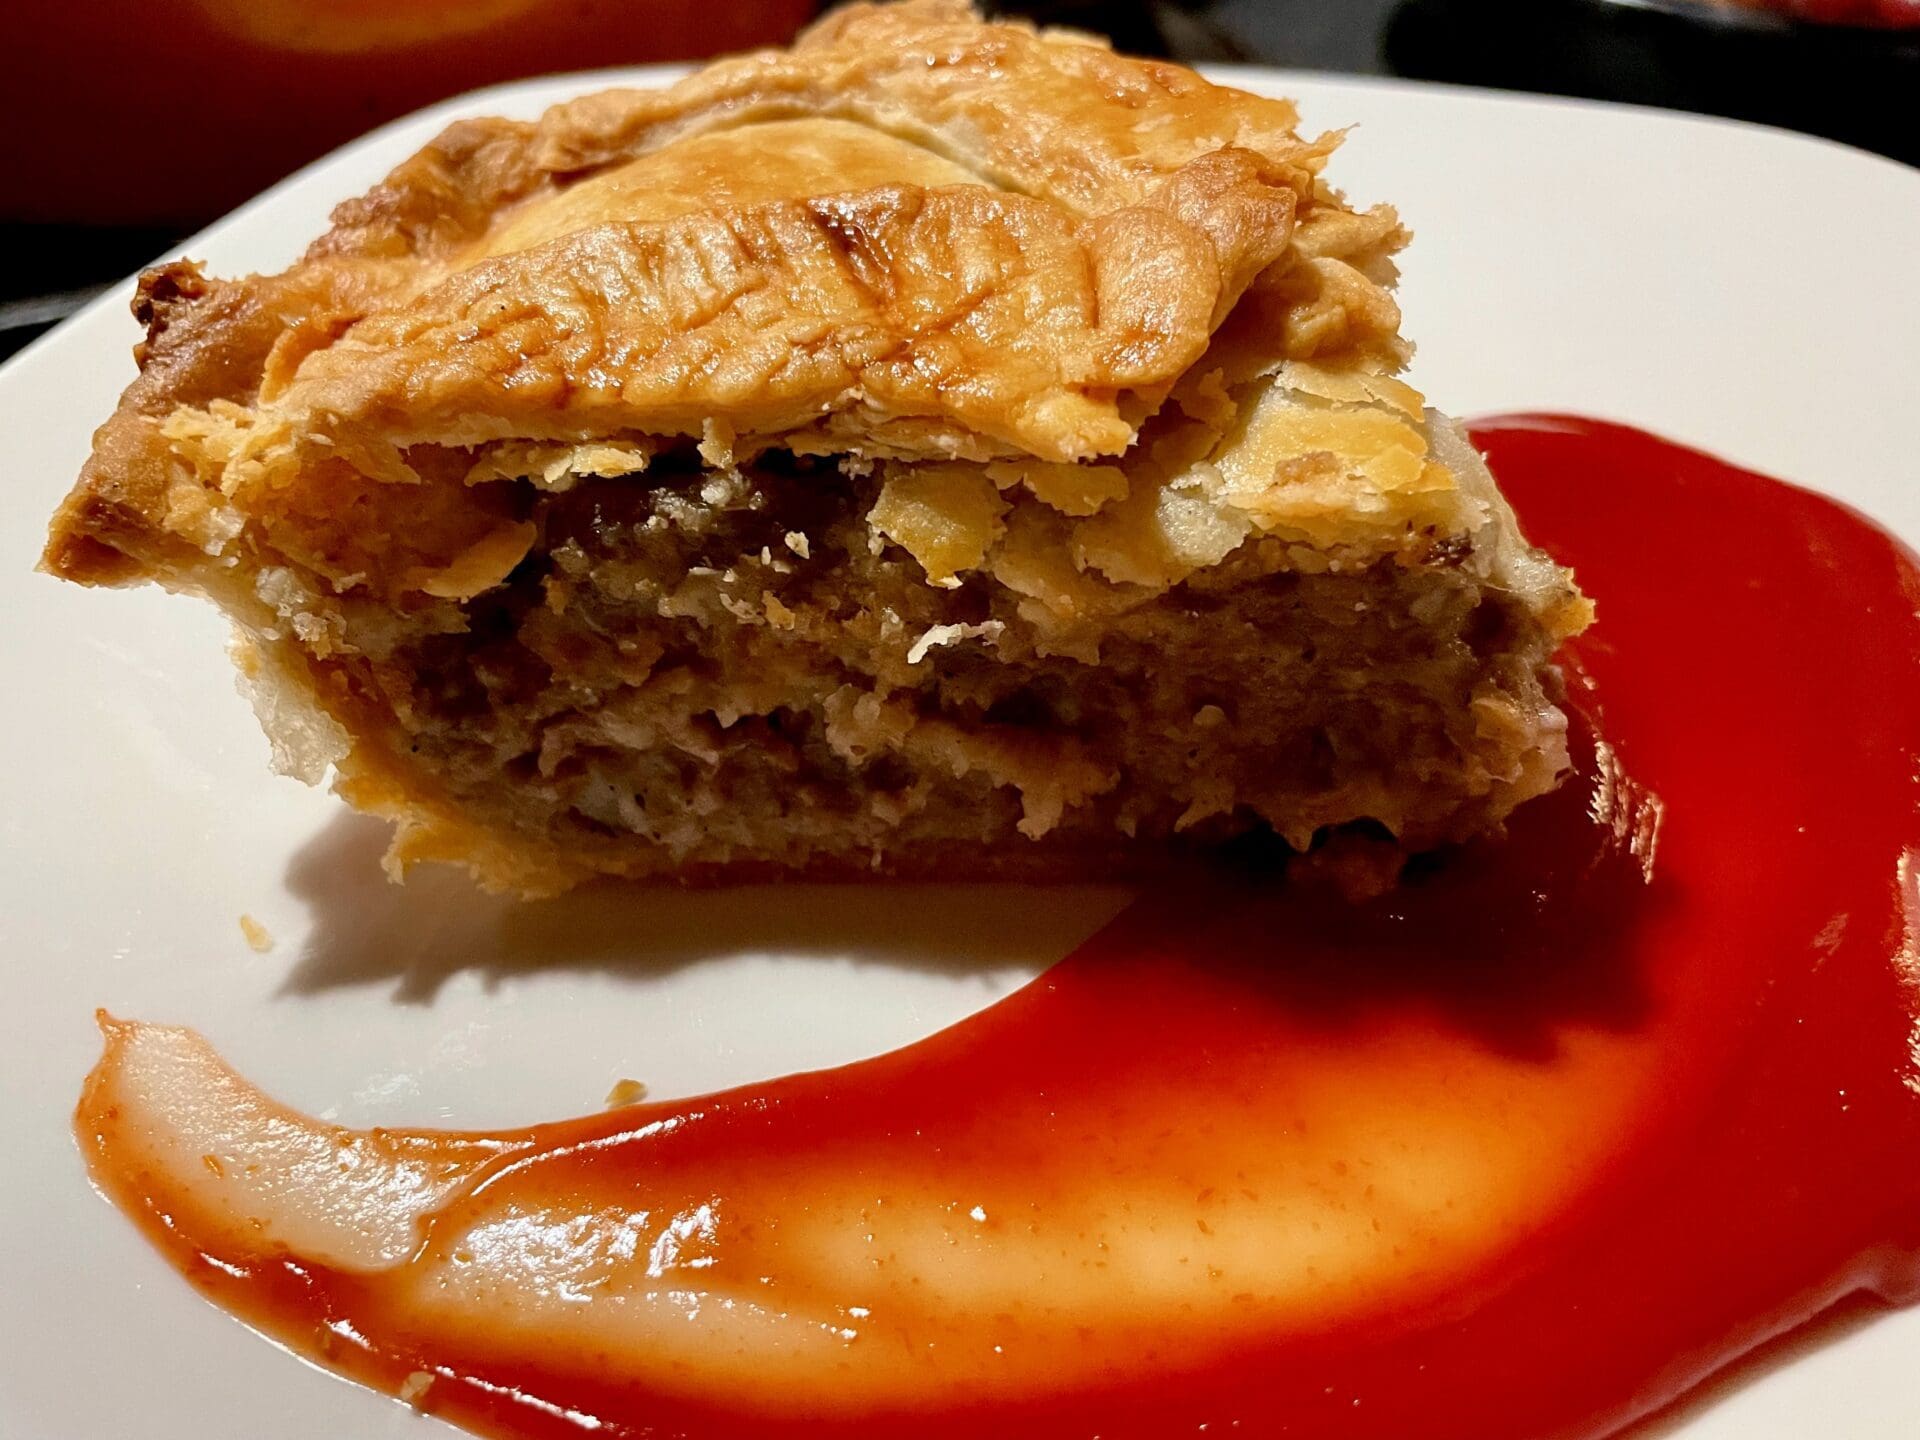 A piece of meat pie with sauce on a plate.